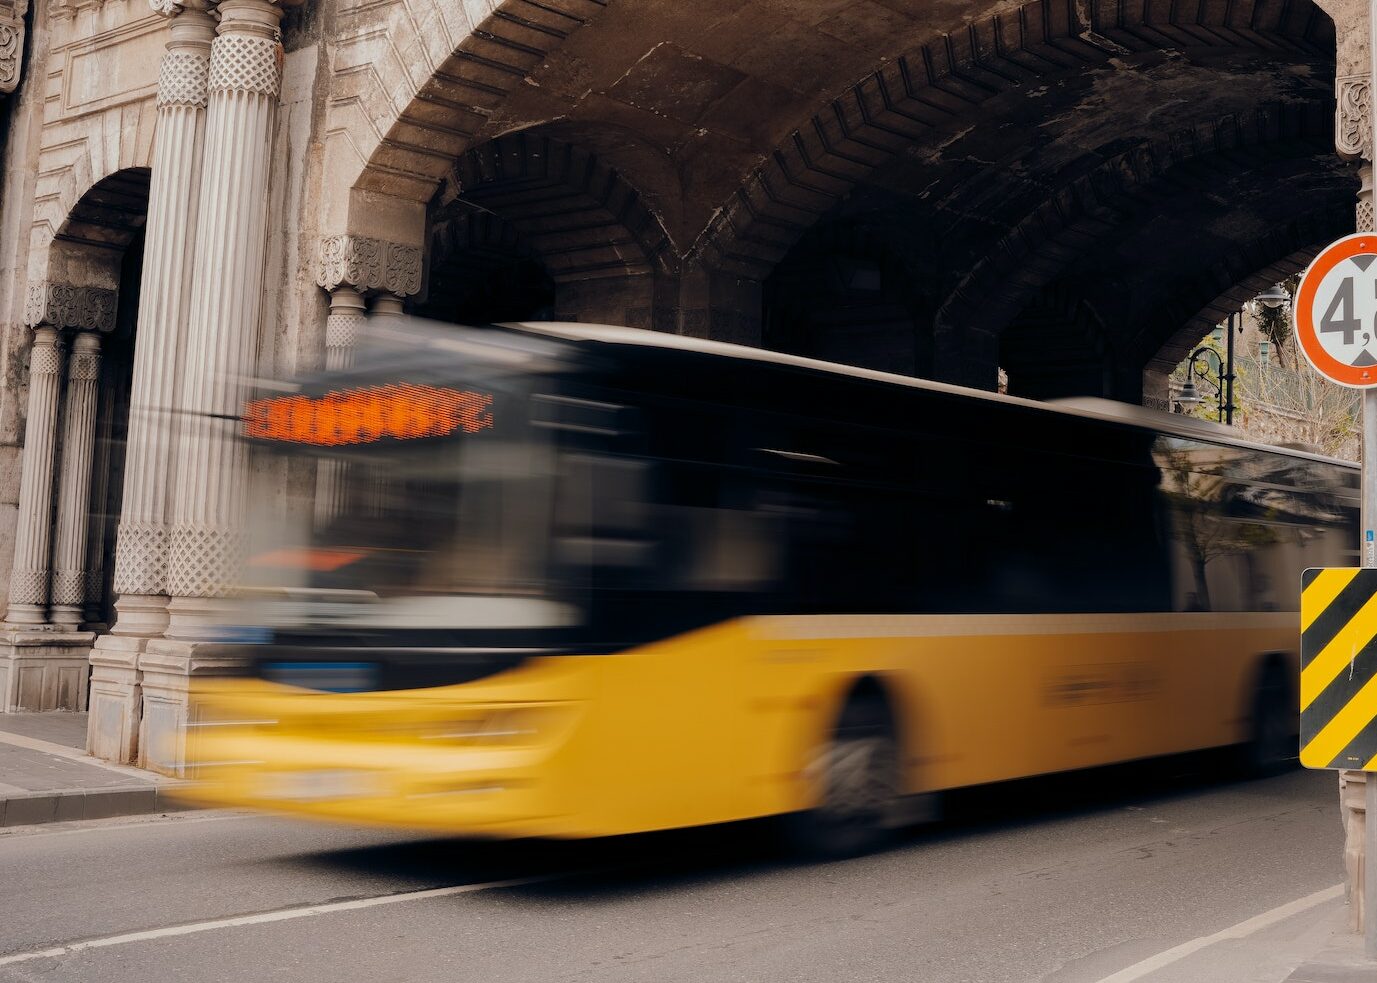 I Got Injured in a Bus Accident: What’s Next?